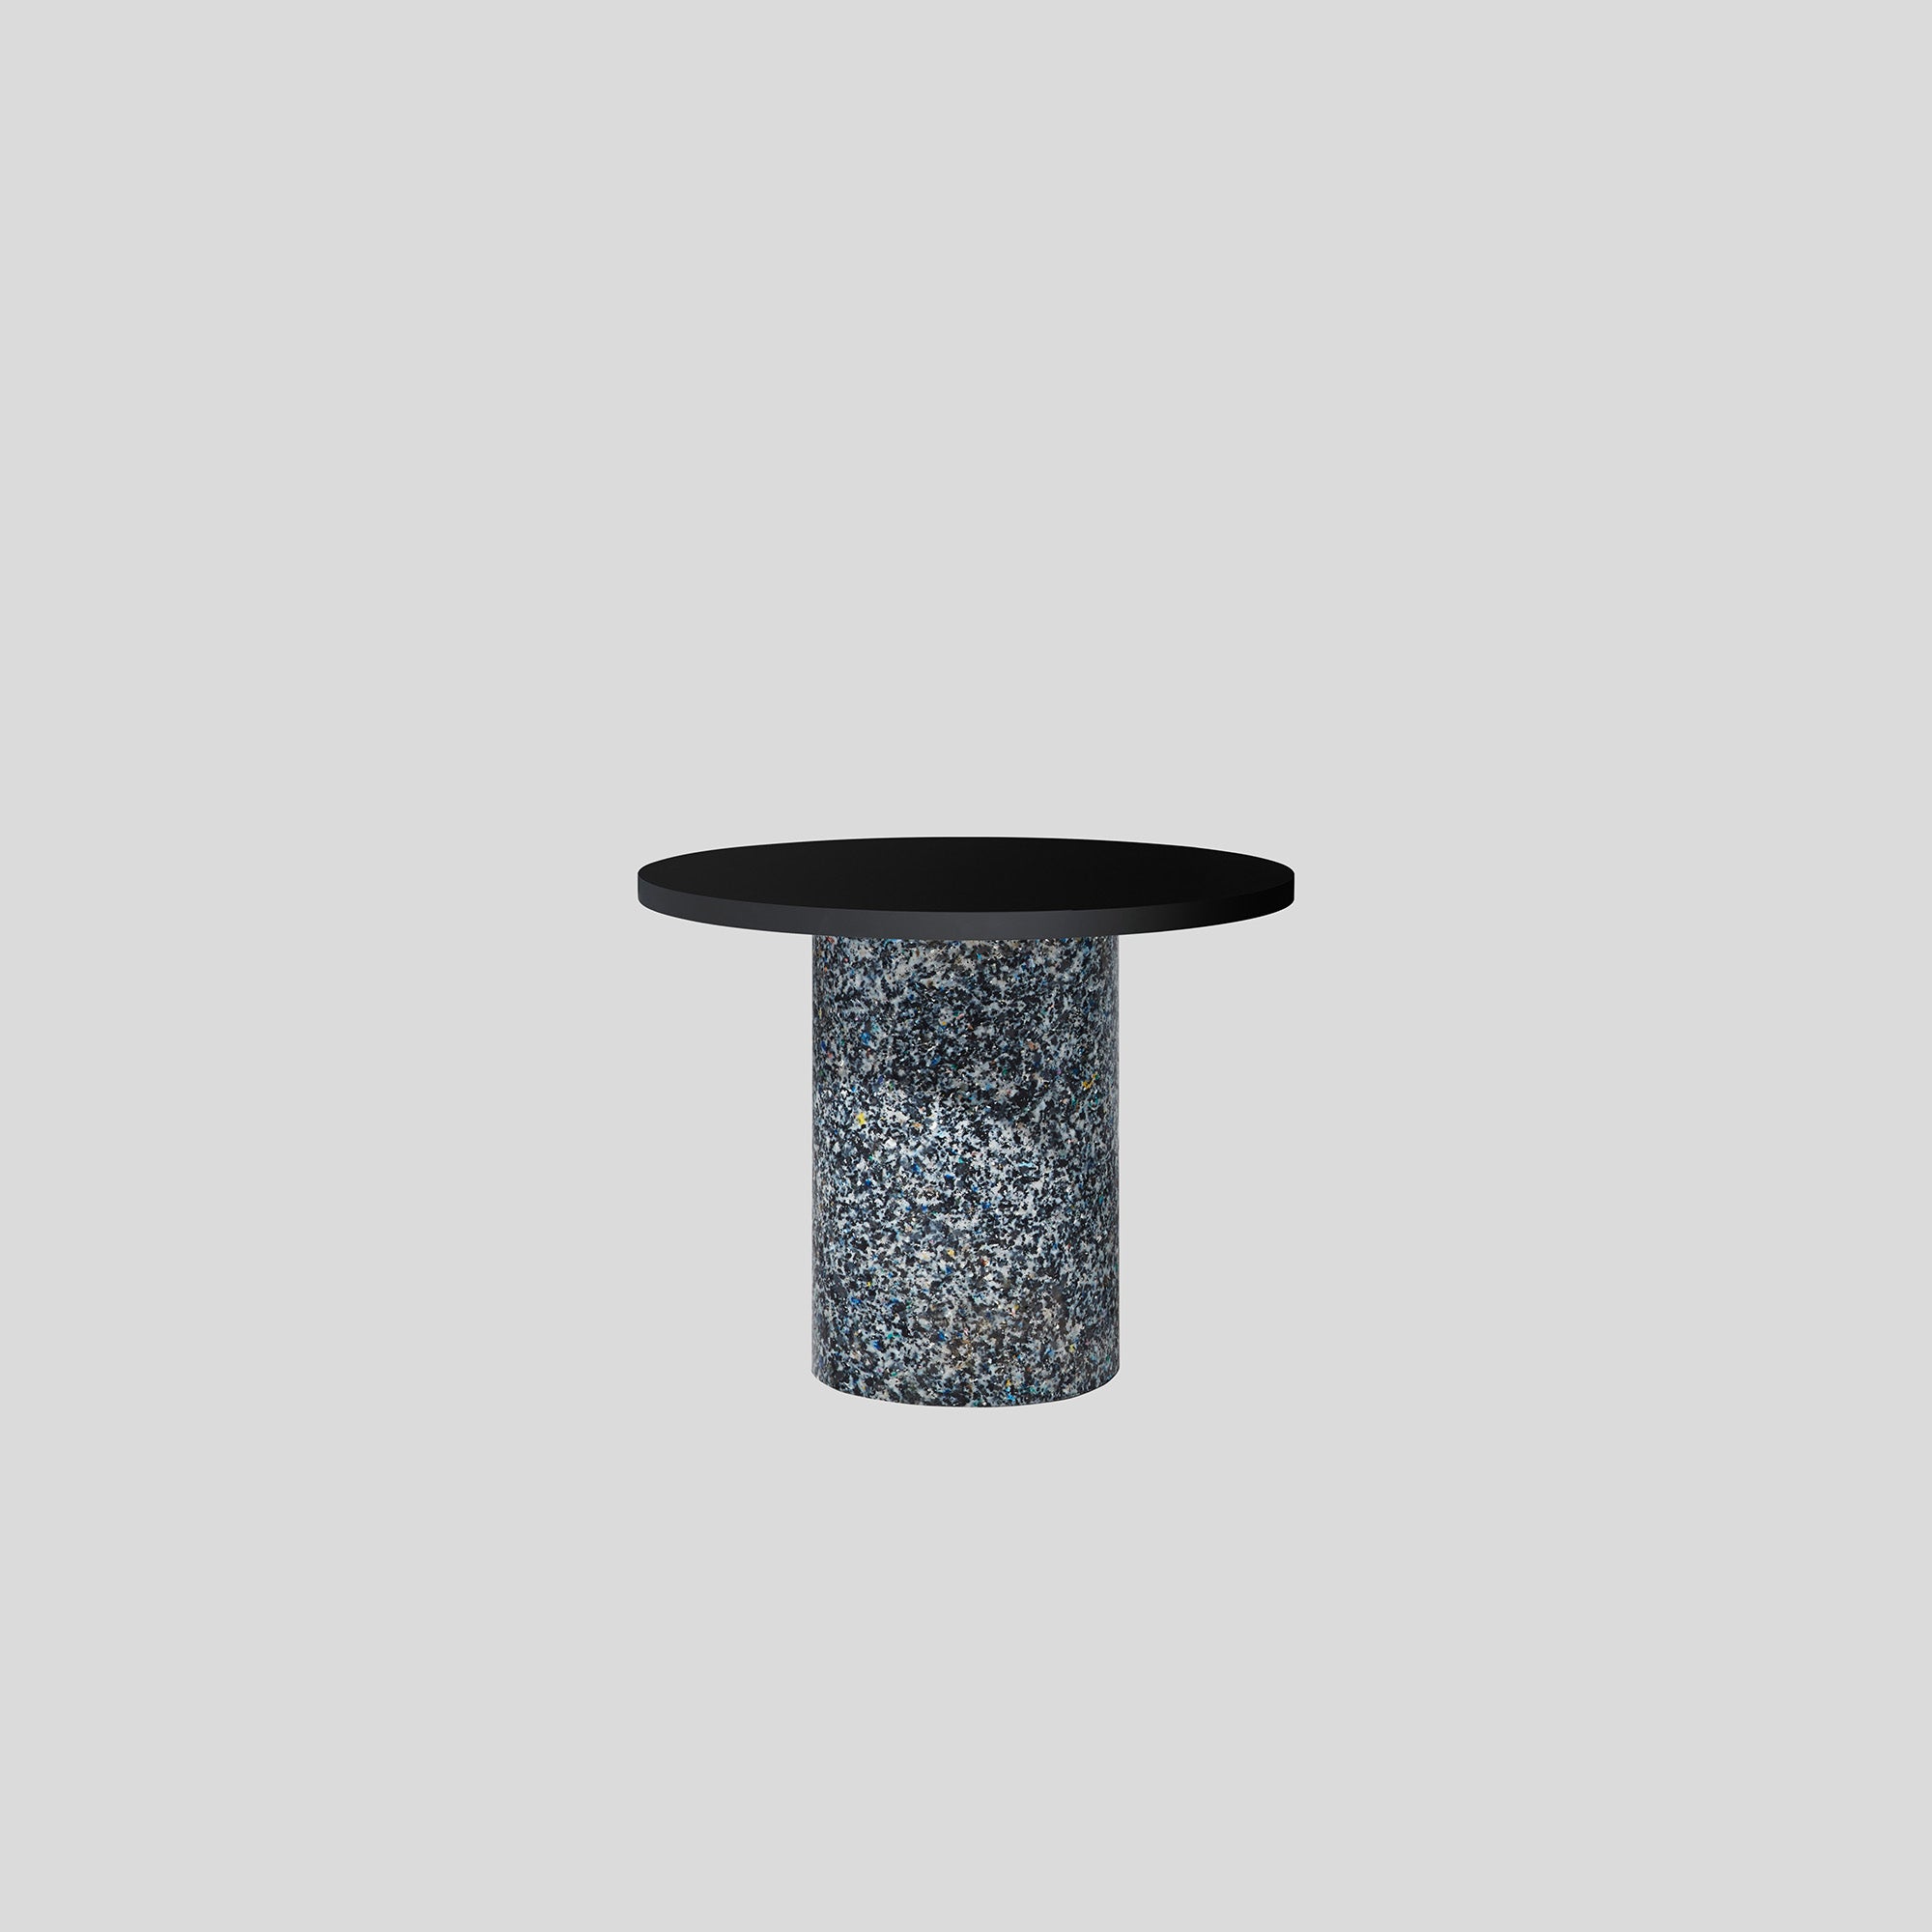 Confetti Dining Table - Round